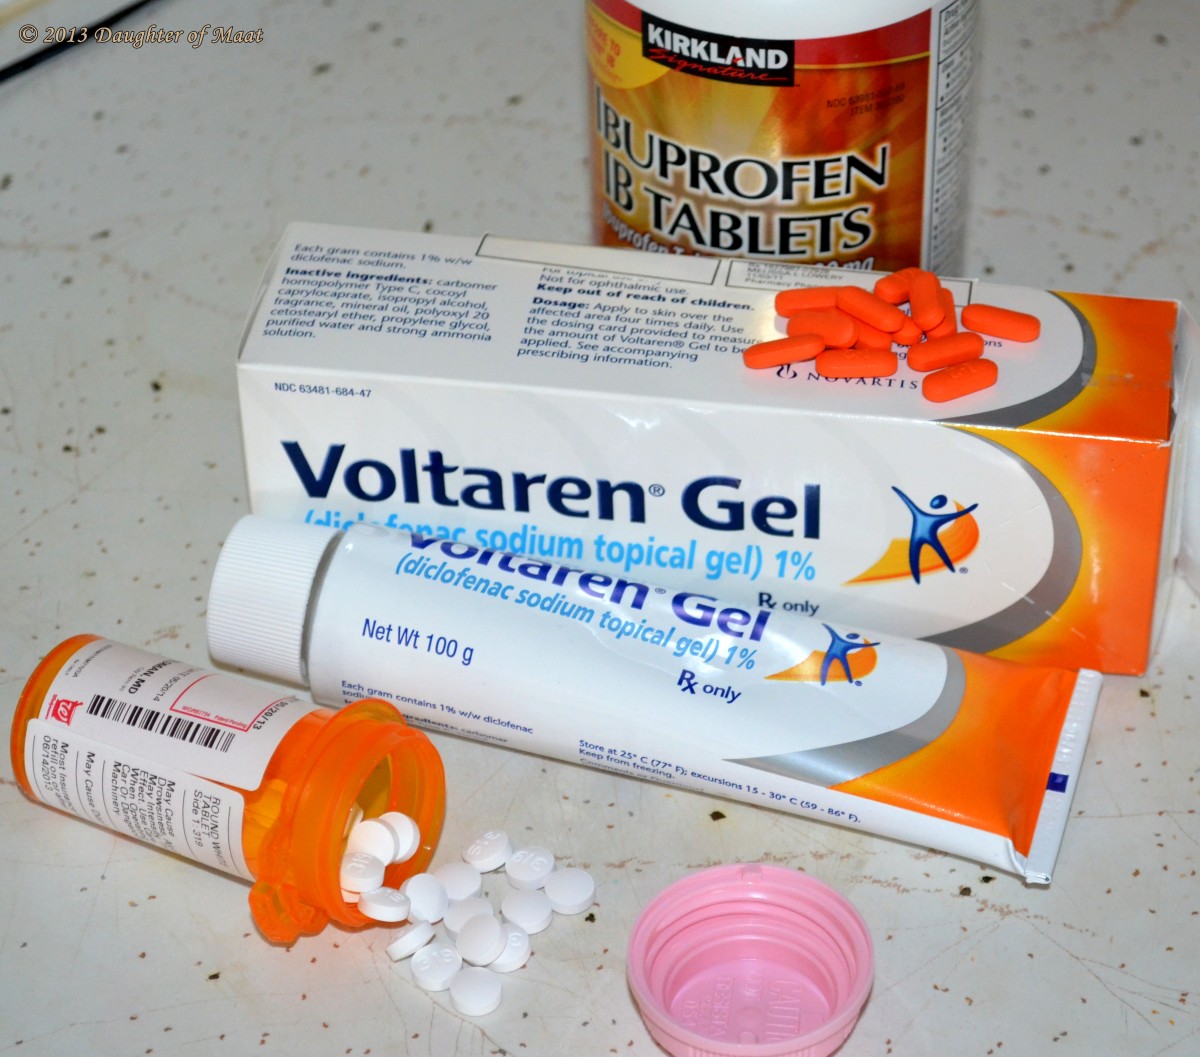 Ibuprofen, Voltaren gel and tramadol medications typically used to treat arthritis pain.